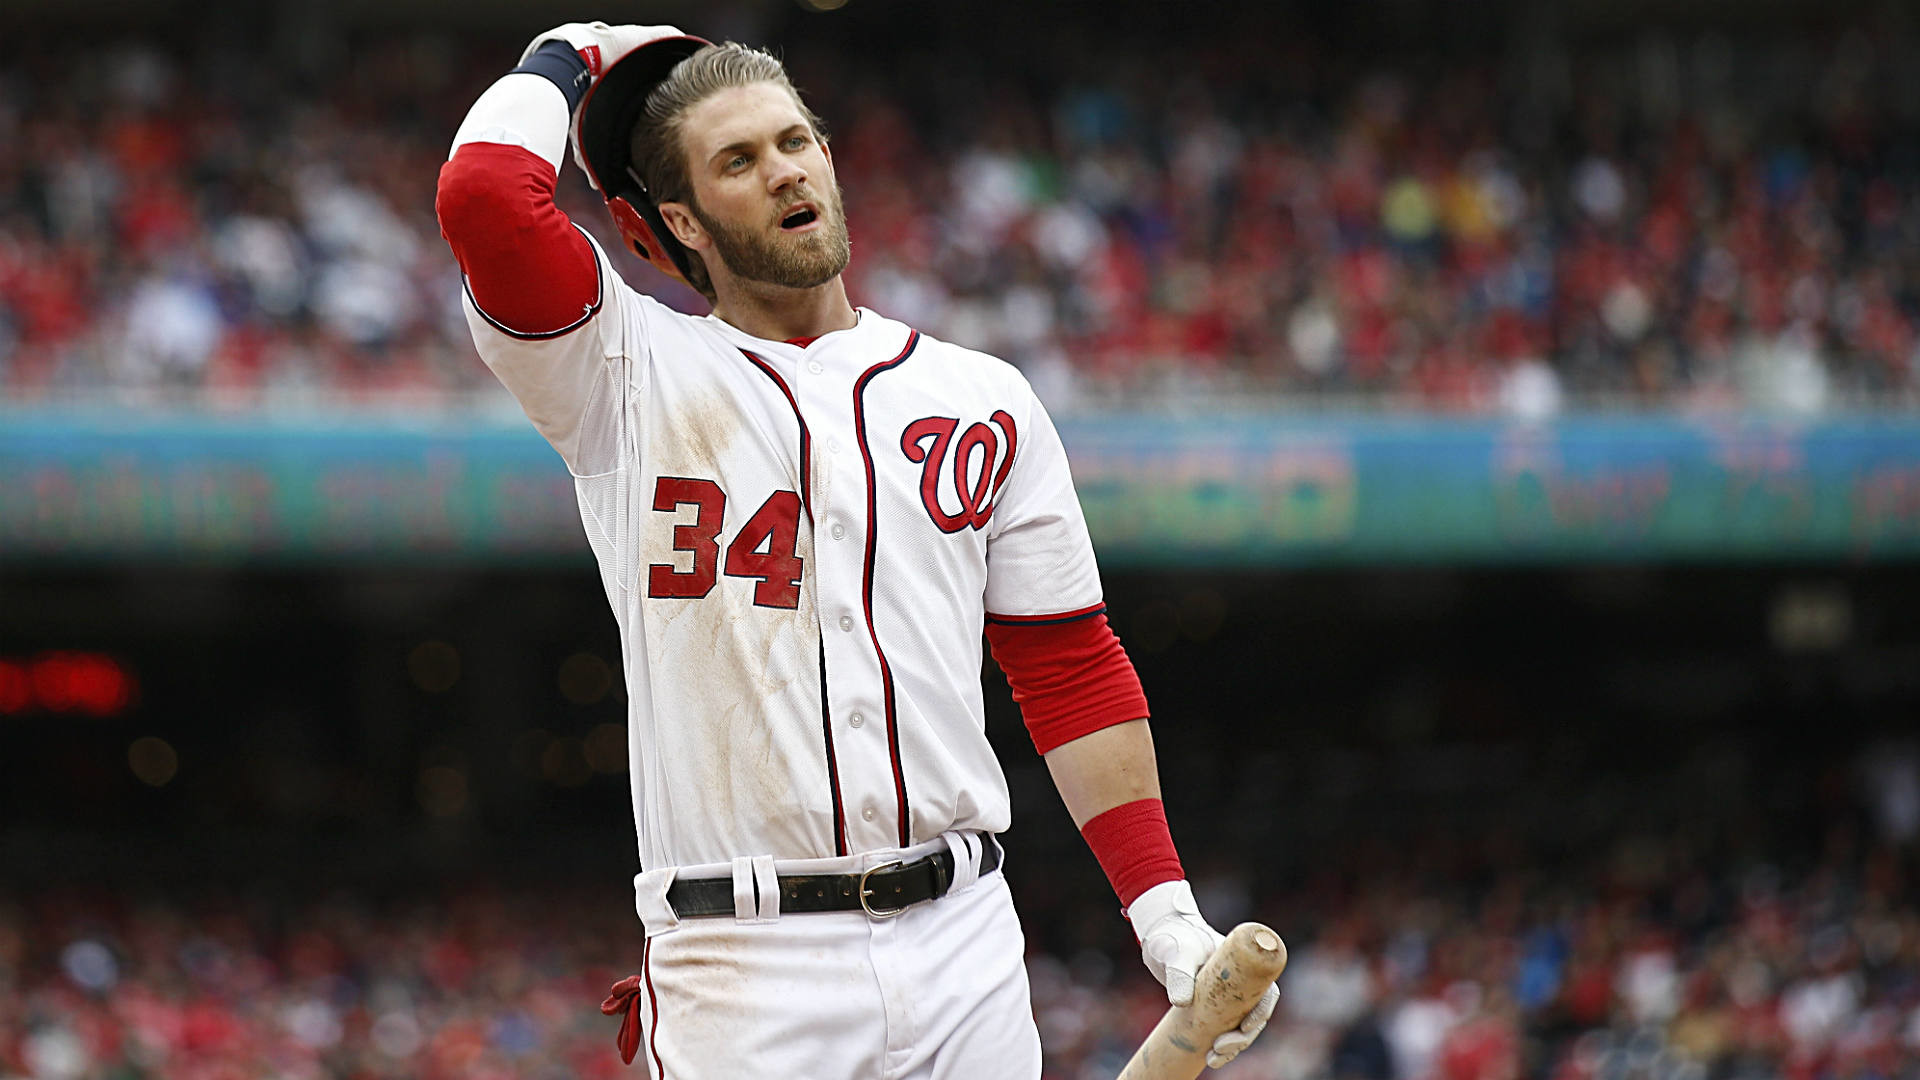 1920x1080 Bryce Harper: 'I'm pretty lost right now, actually' | MLB | Sporting News